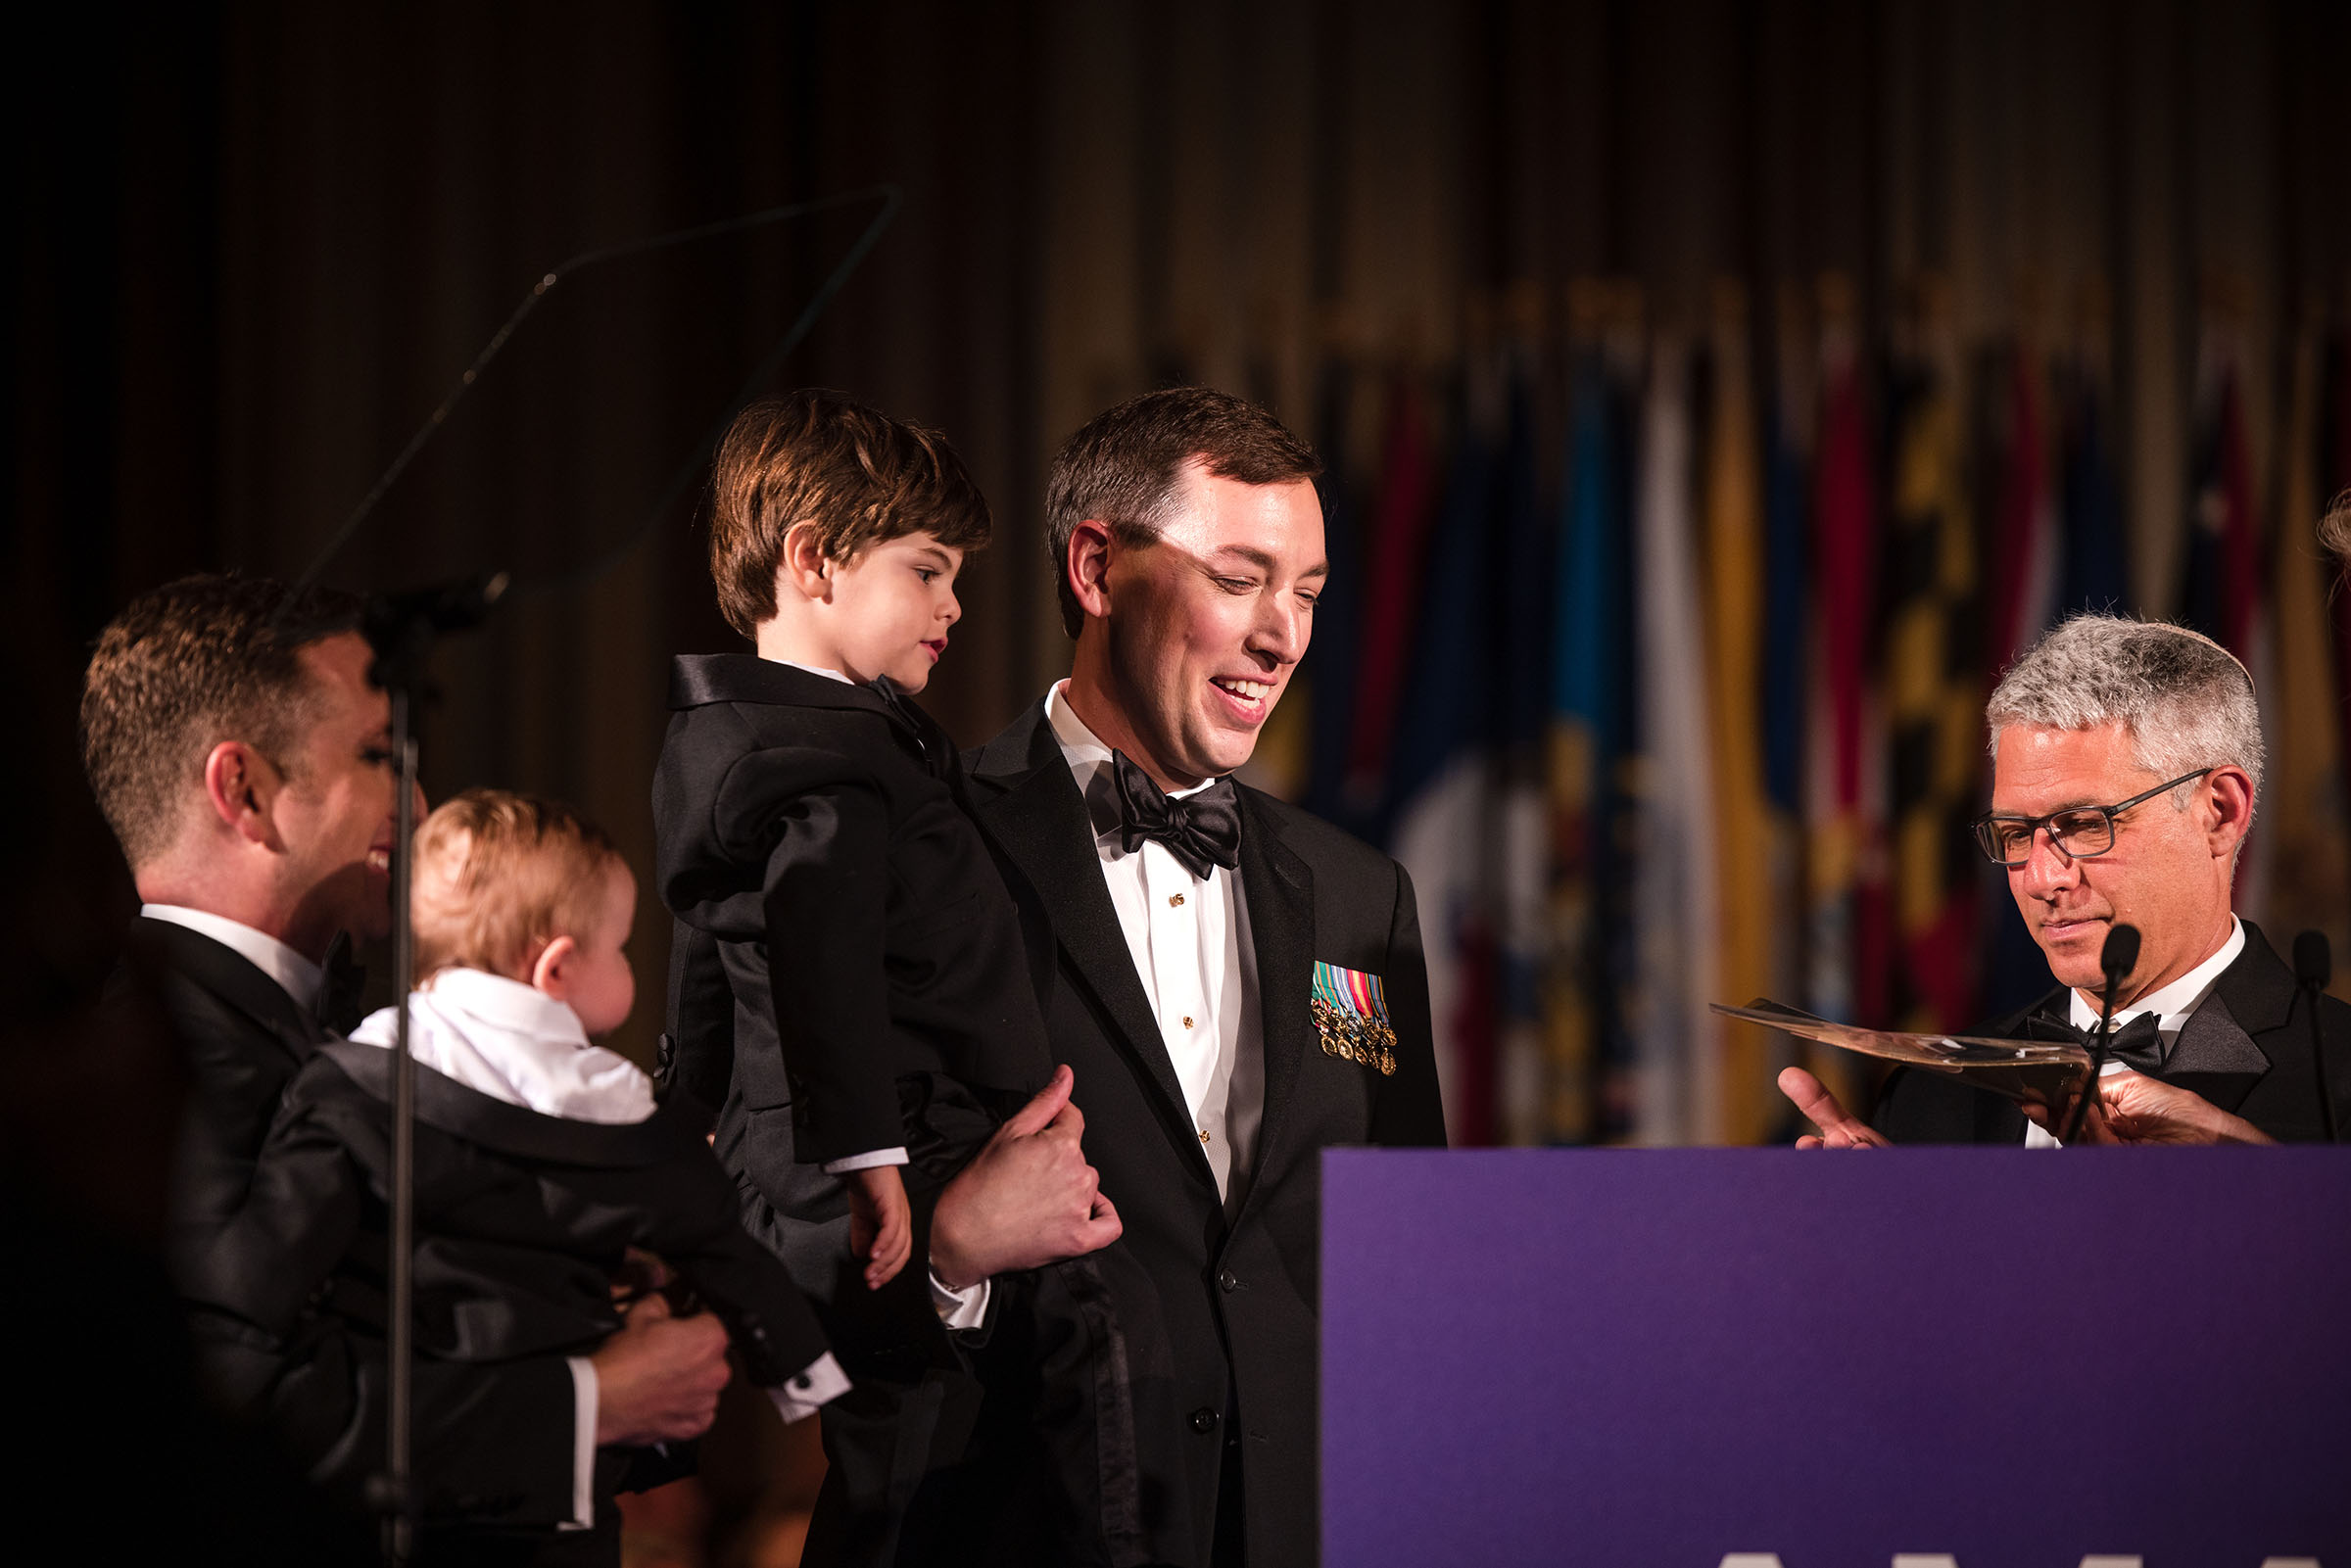 A man holds his child on stage during a ceremony where he gave an inaugural address as the American Medical Association's new president.